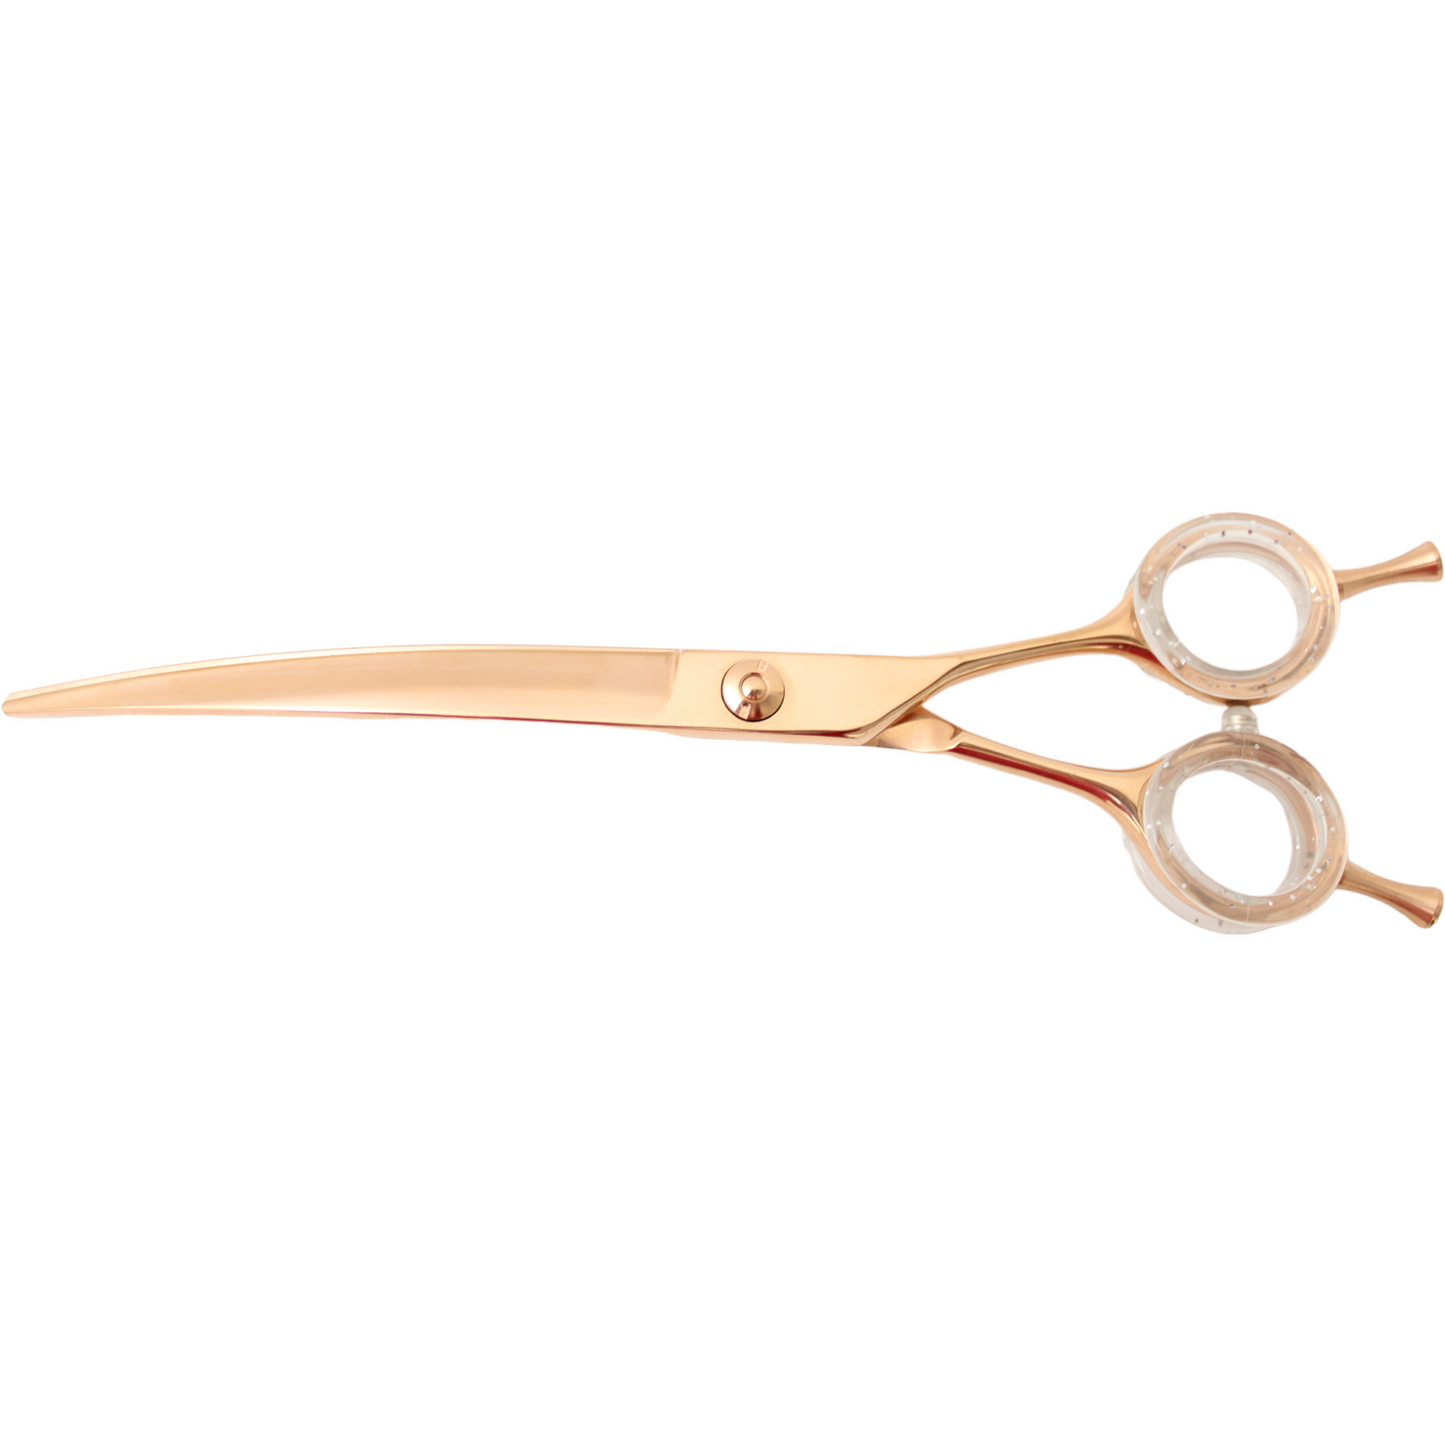 Rasa 7.0”Serrated Curves (Right Hand) Rose gold 440c Steel